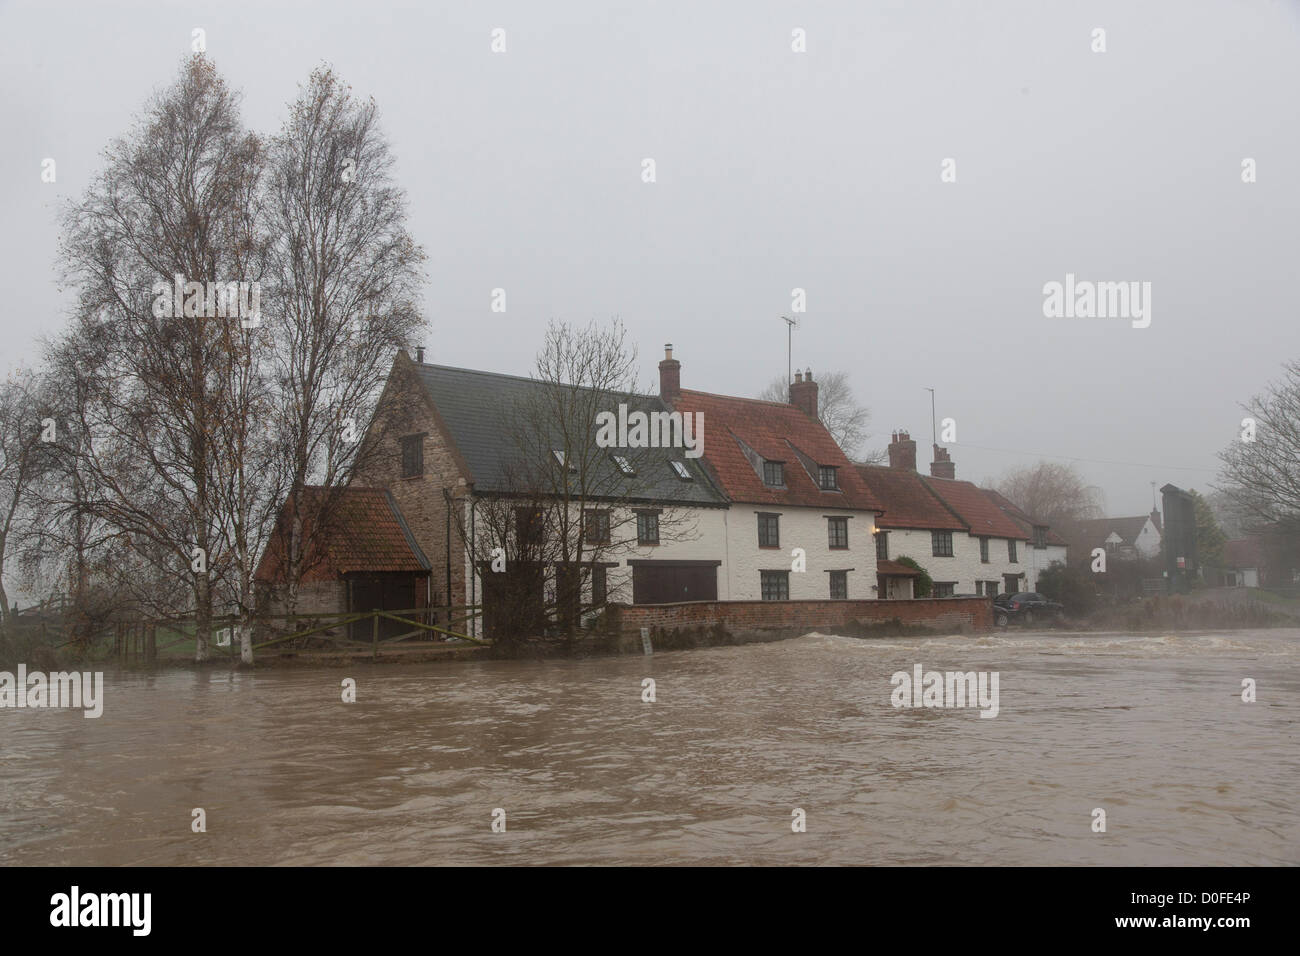 2012-11-24 Hardwater MIll, Hardwater Road, Great Doddington Northamptonshire UK. water rising through the floors one resident reported this morning, as the river Nene overflows. Stock Photo